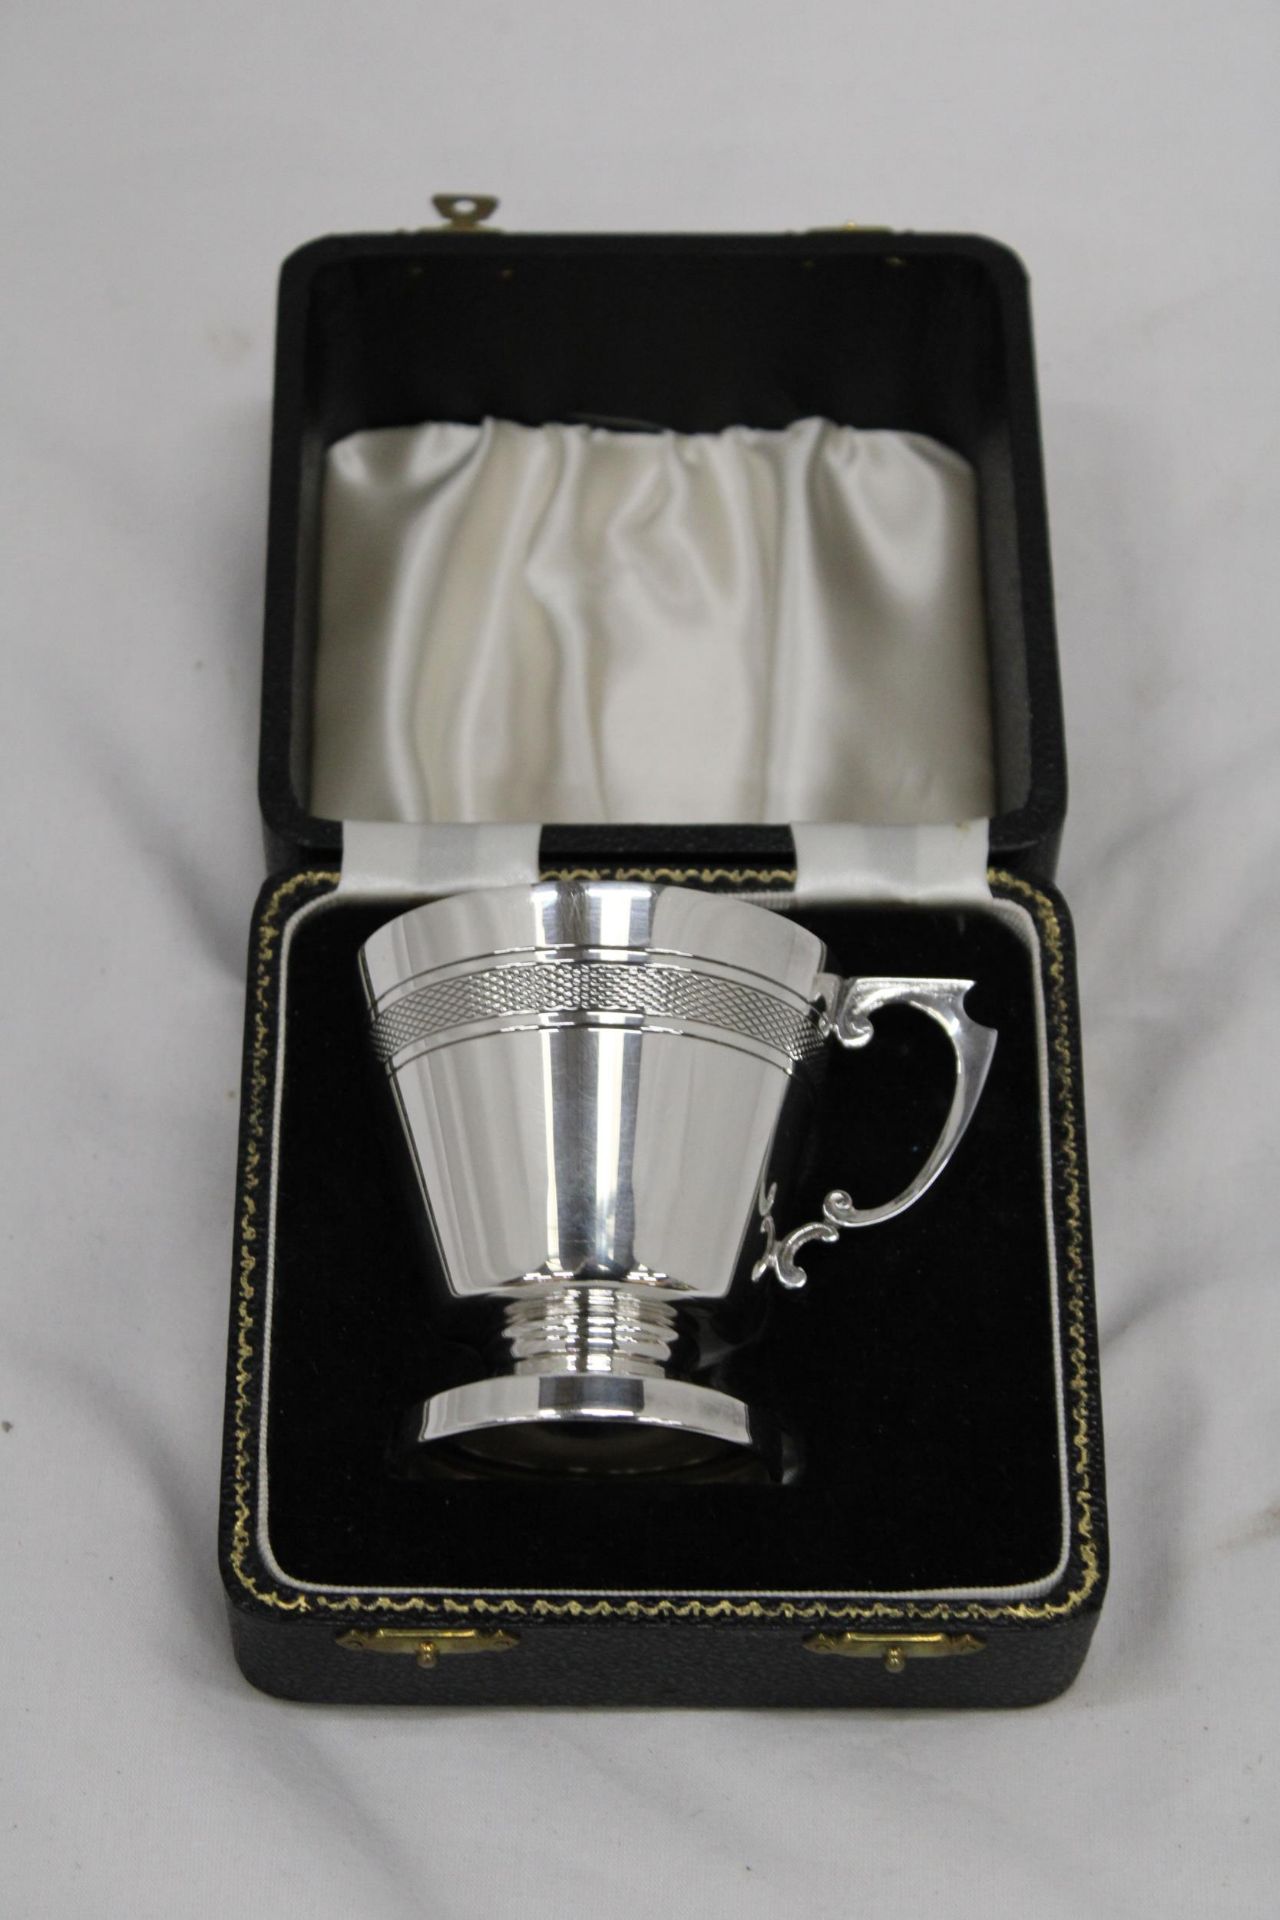 A VINTAGE SILVER PLATED CHRISTENING CUP IN THE ORIGINAL PRESENTATION BOX